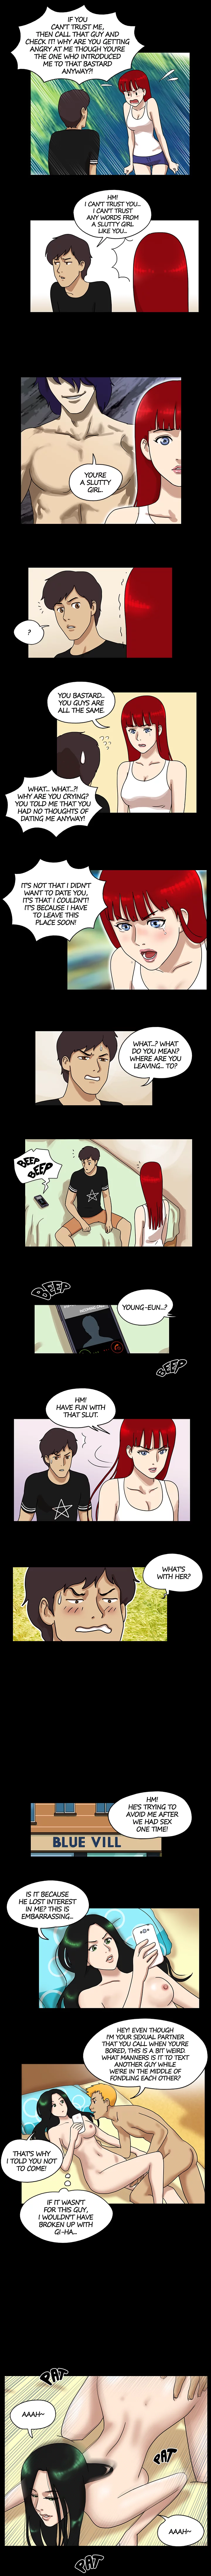 17 Sex Fantasies - Chapter 23 Page 2